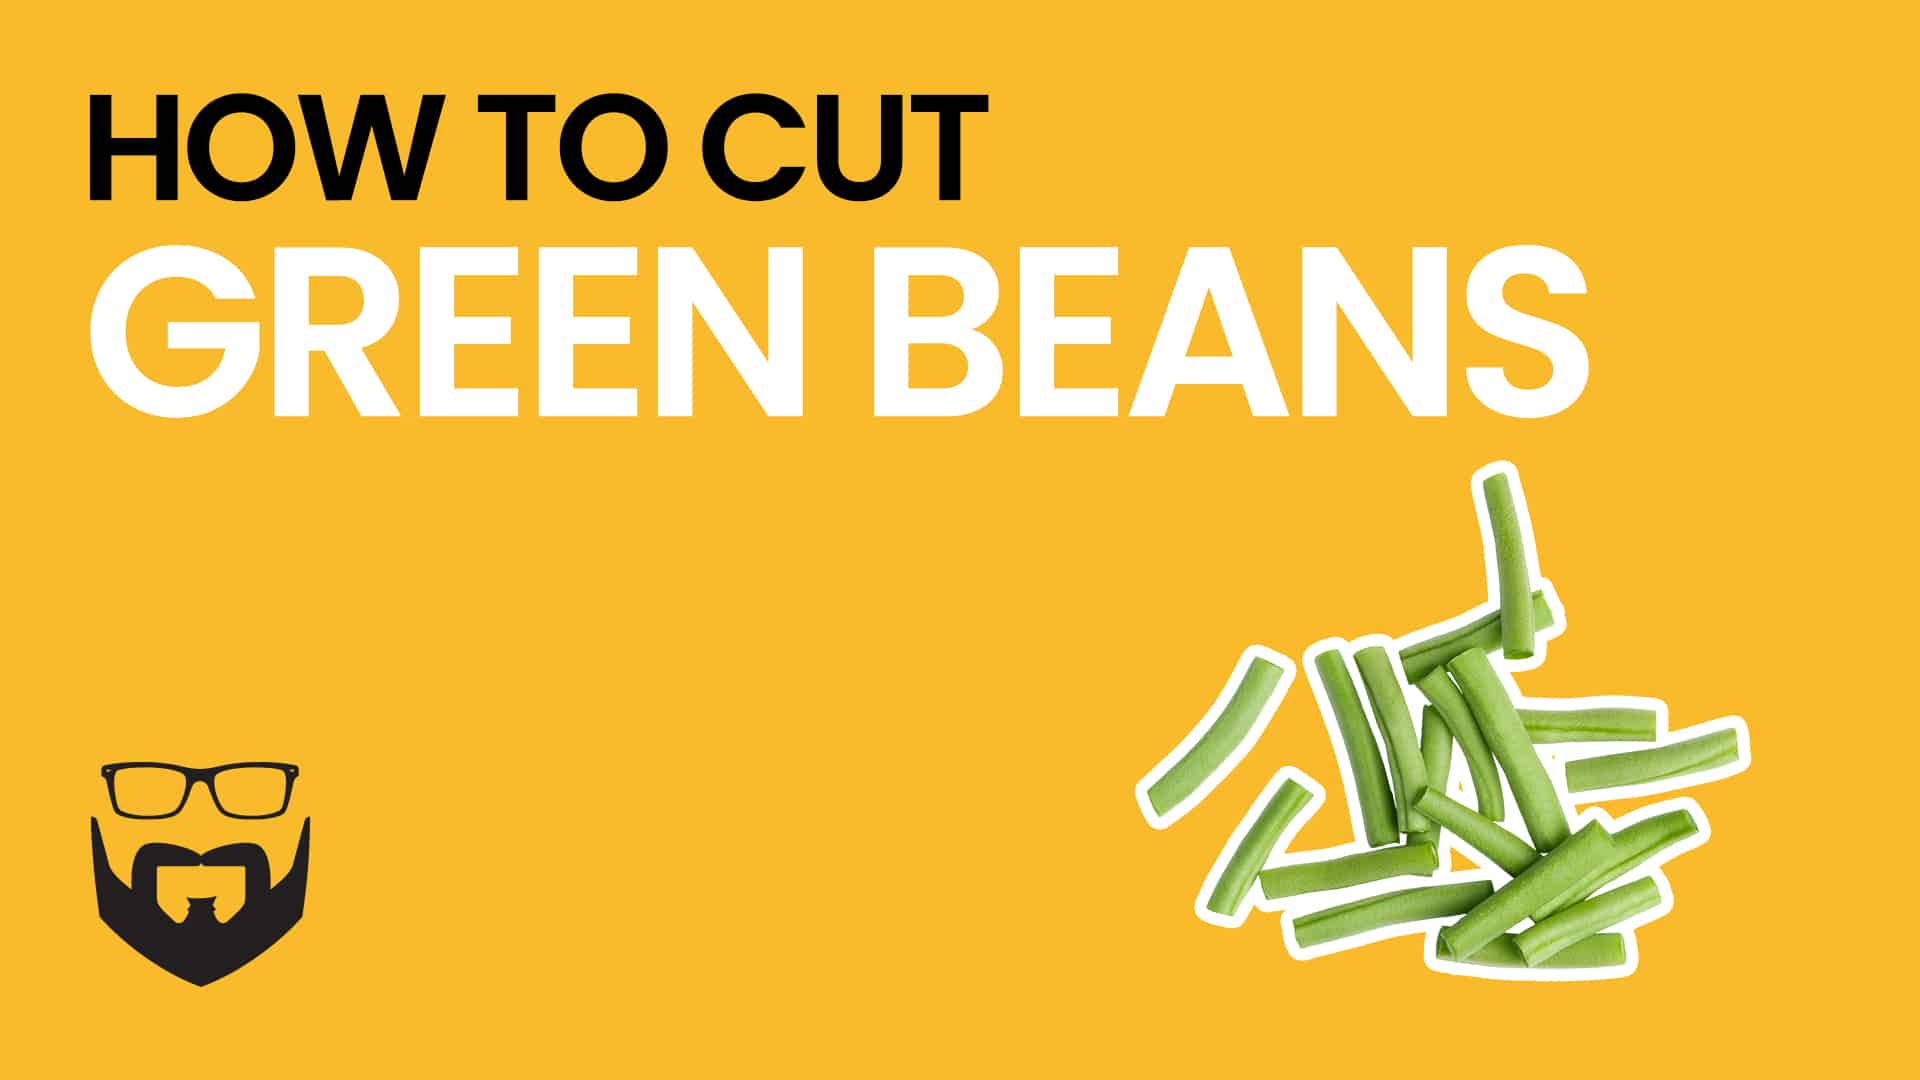 How to Cut Green Beans Video - Yellow